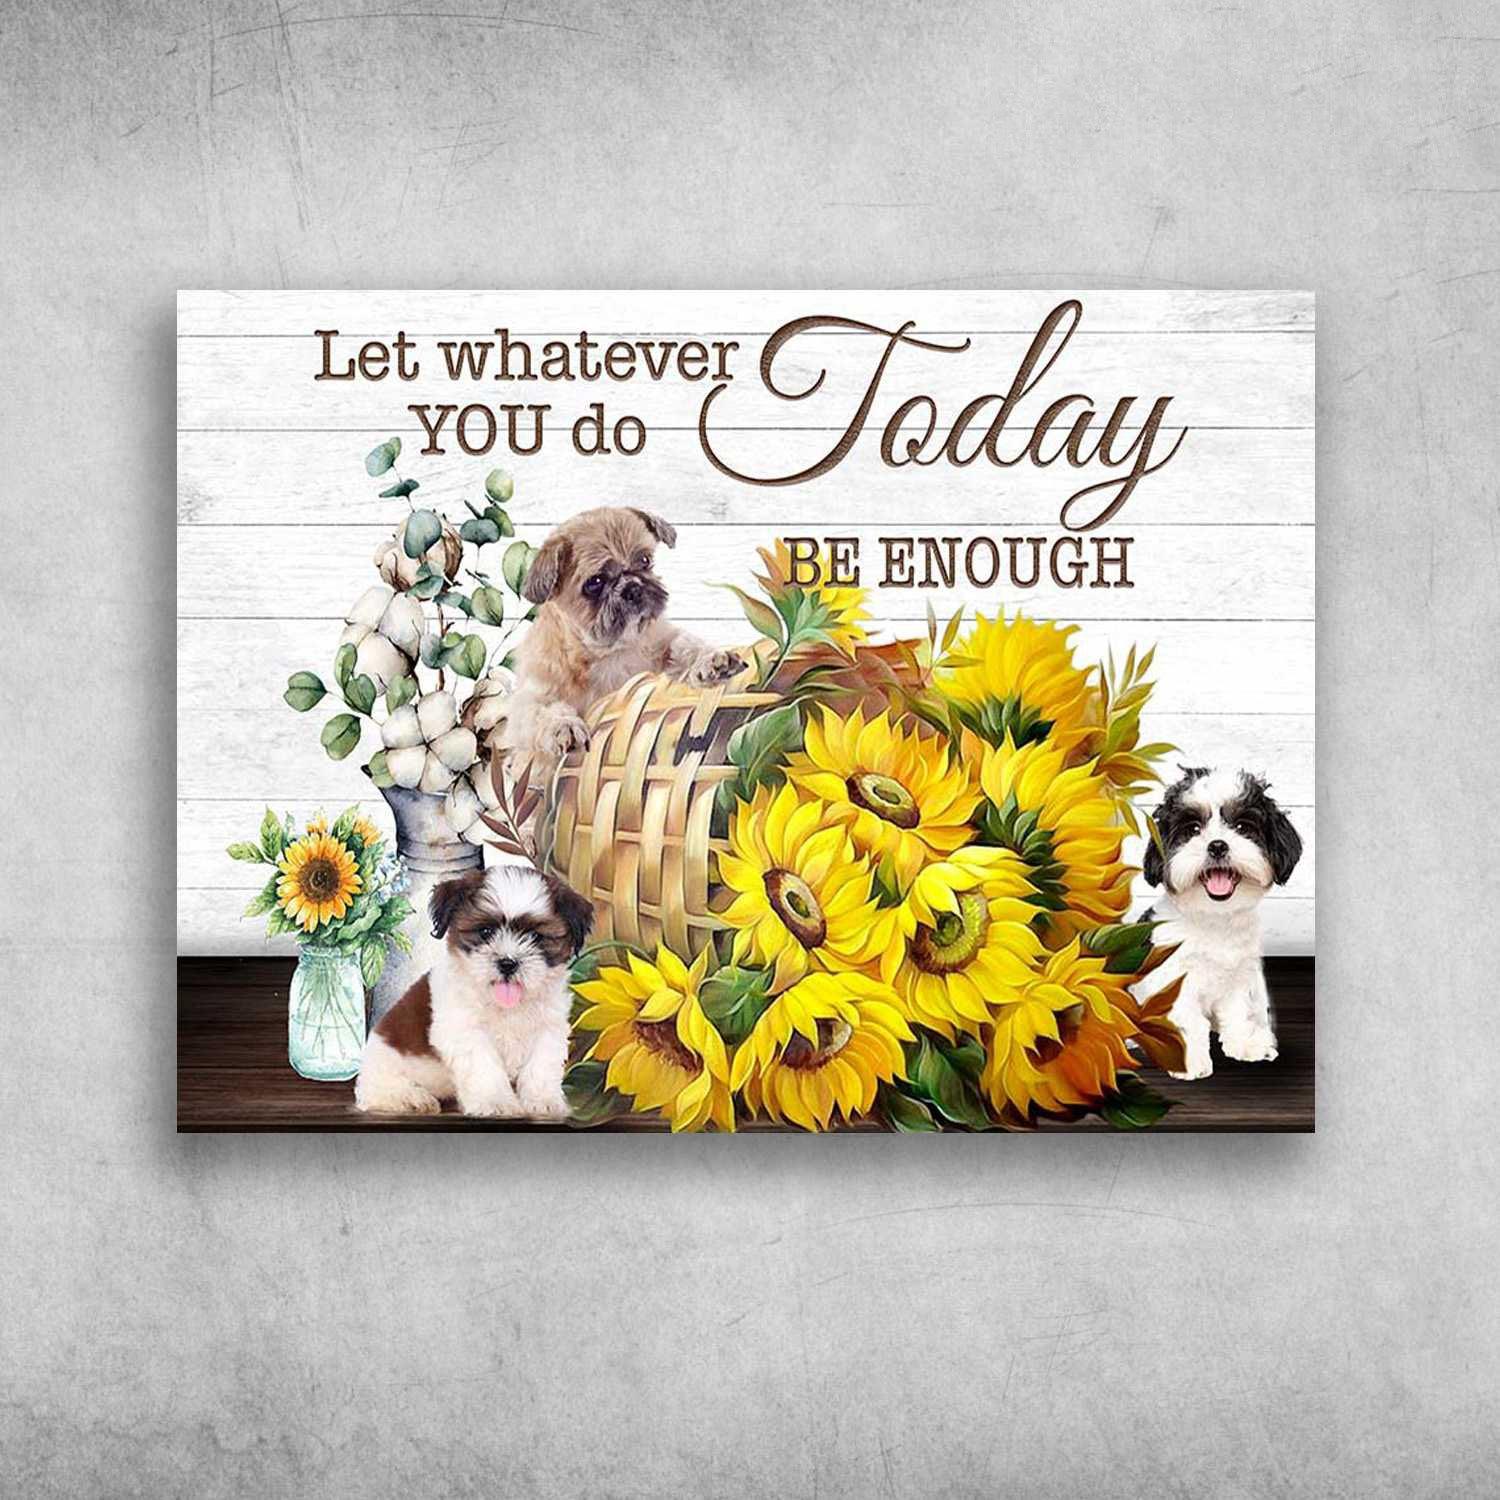 Maltipoo Dog Landscape Canvas - Maltipoo Dog Sunflower Let Whatever You Do Today Be Enough Canvas - Perfect Gift For Maltipoo Dog Lover, Dog Lover - Amzanimalsgift